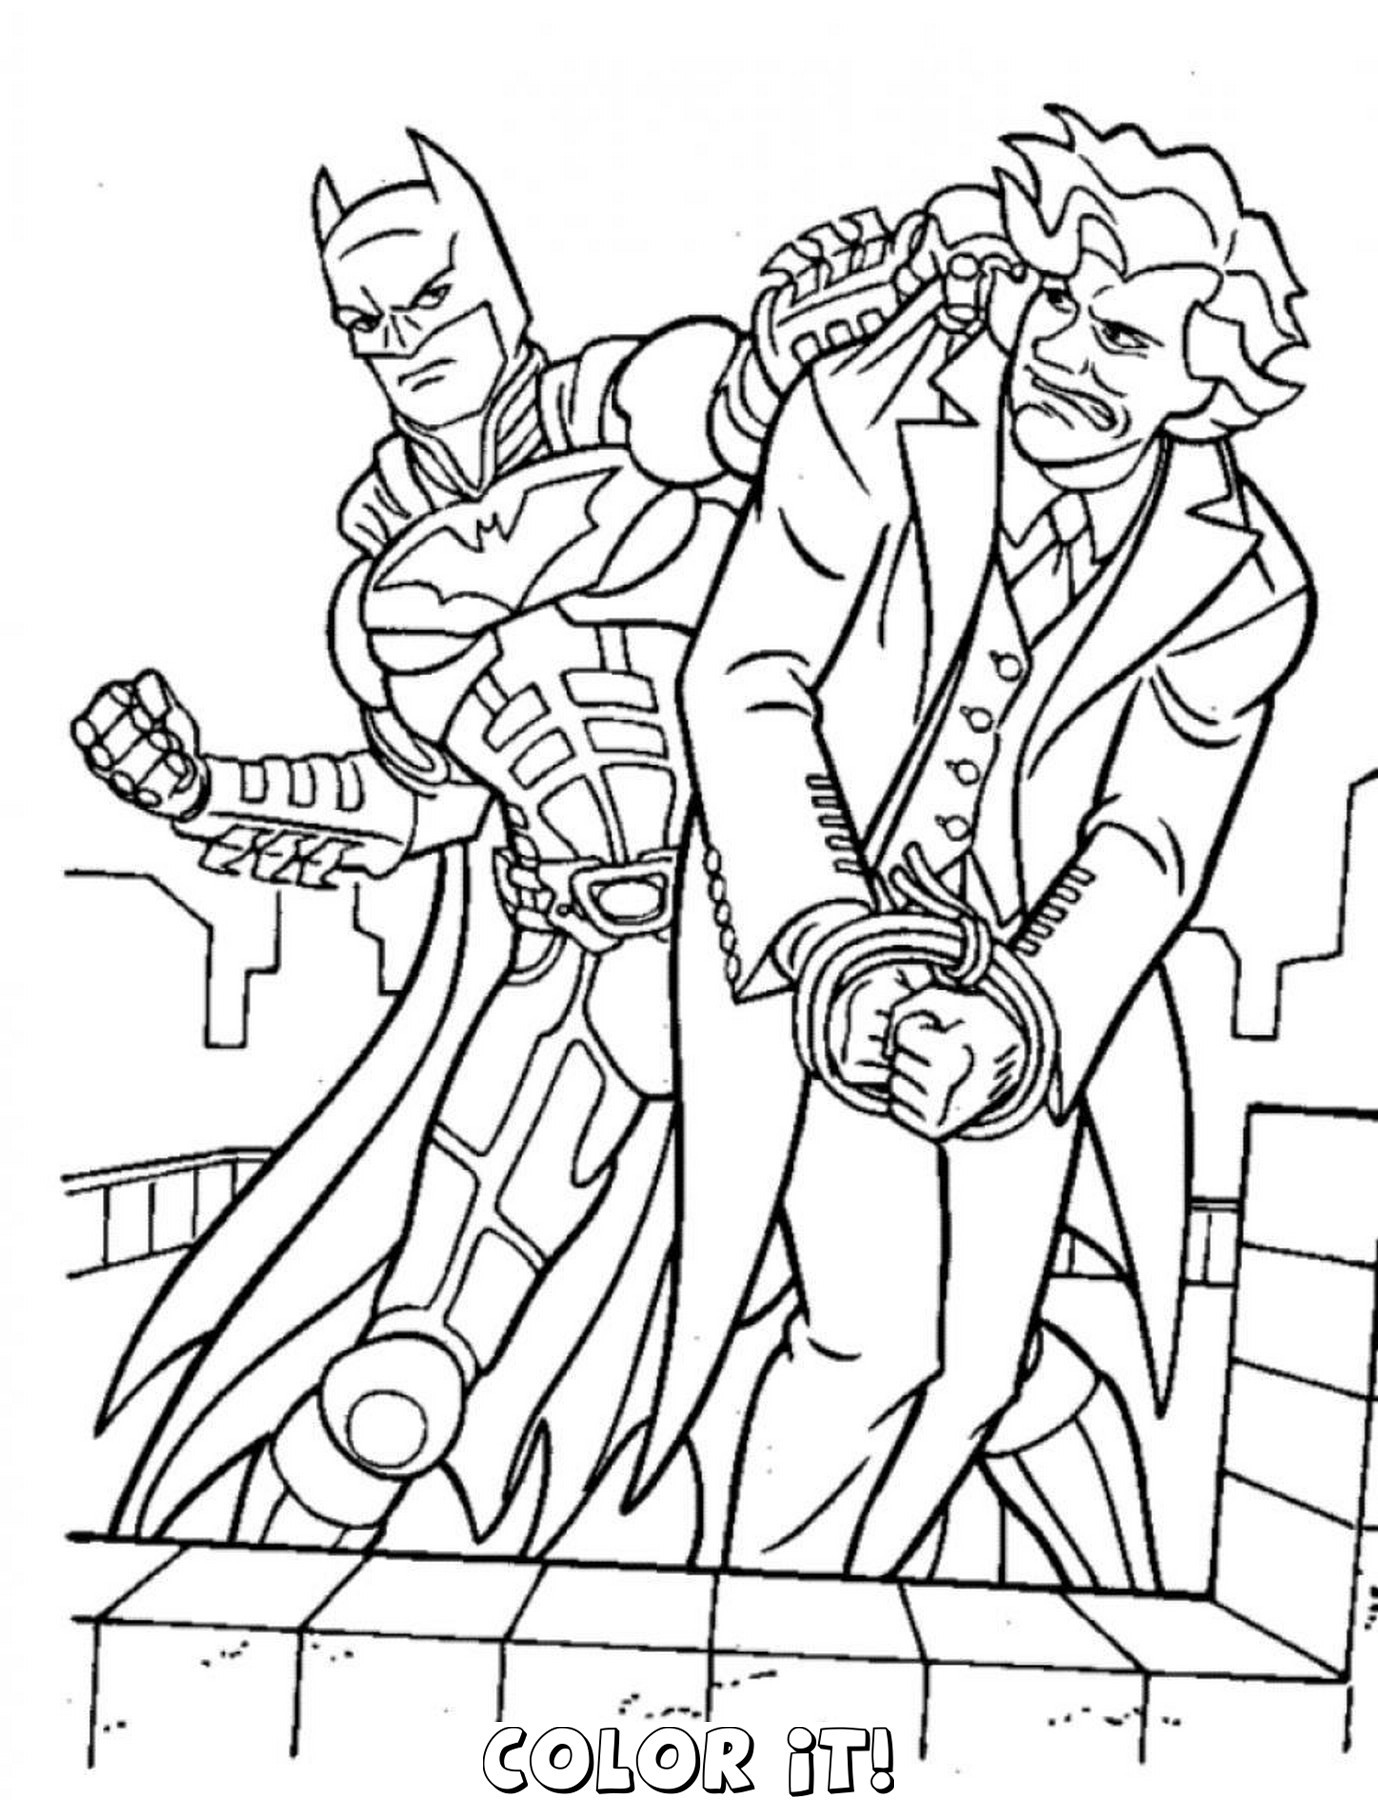 Batman Coloring Pages For Toddlers
 Super Hero coloring Batman coloring pages and